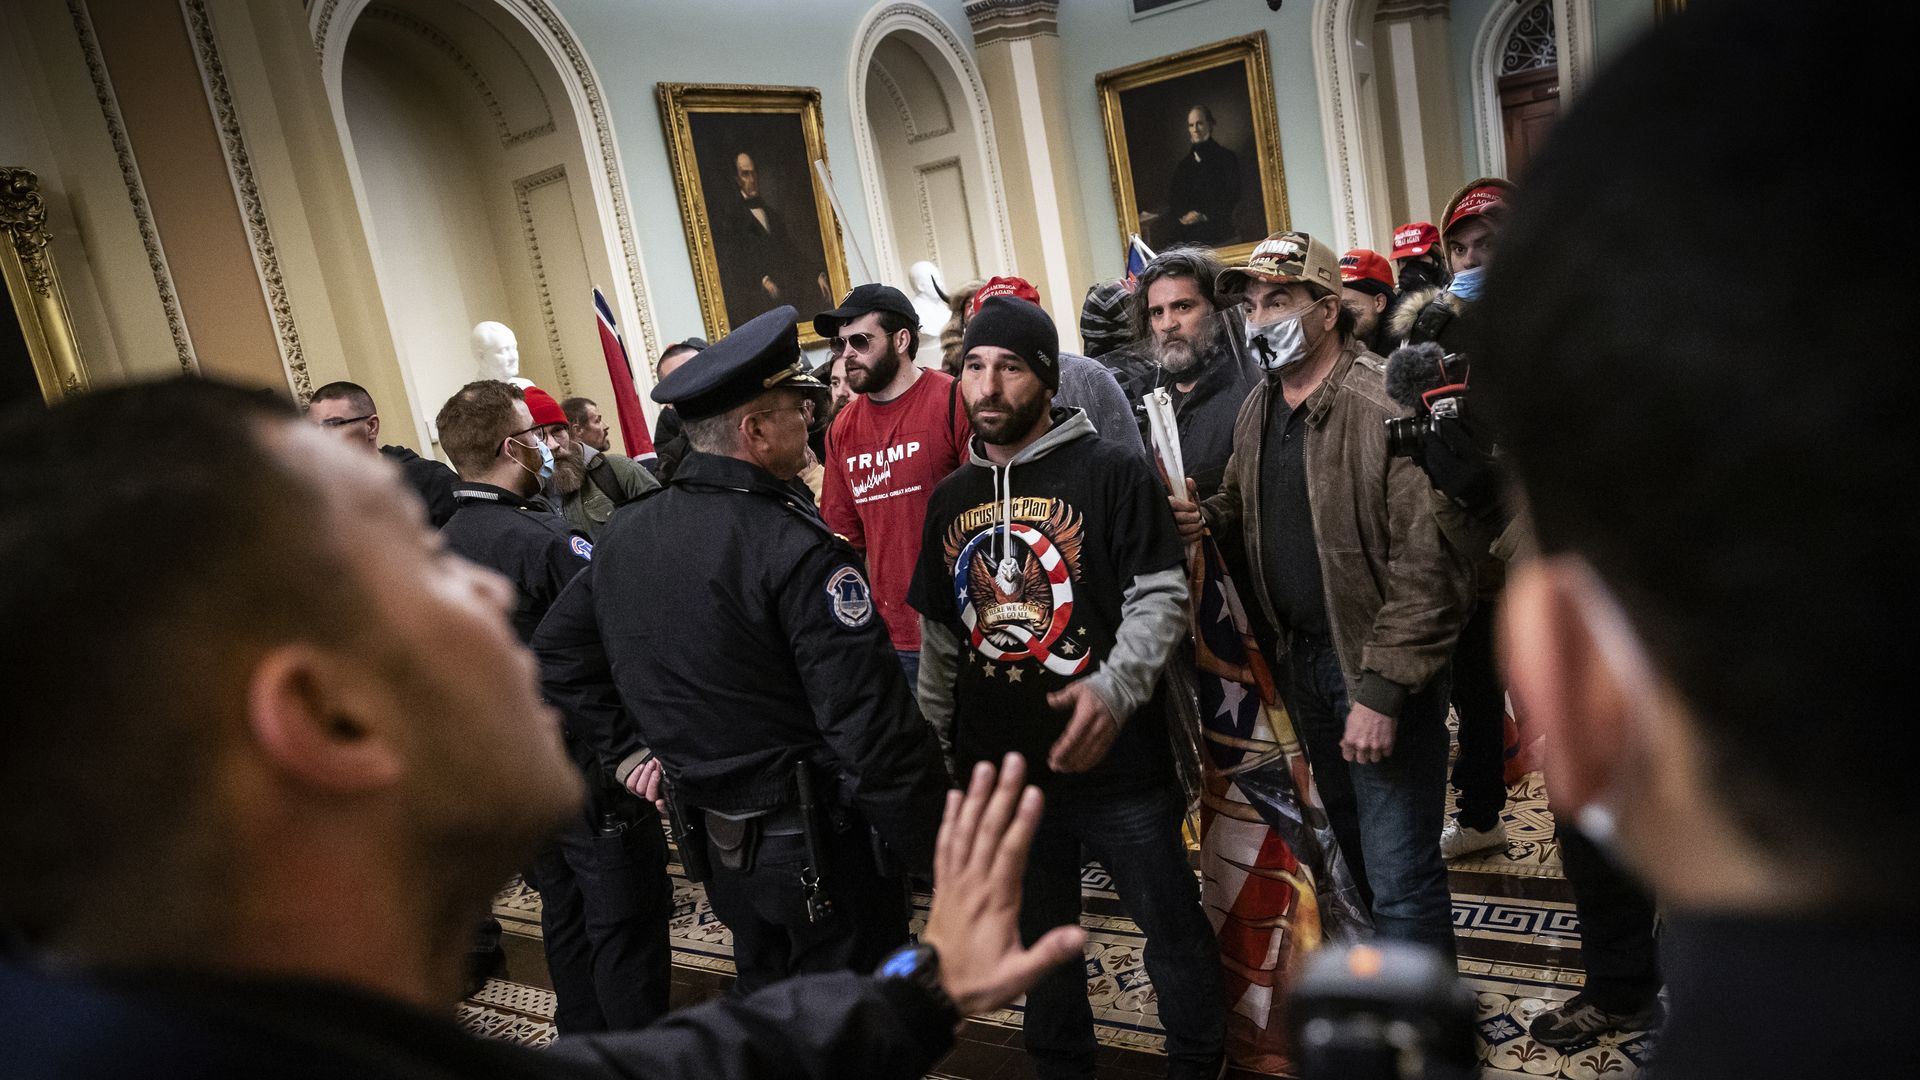 Protesters interact with Capitol Police inside the U.S. Capitol Building on January 06, 2021 in Washington, DC